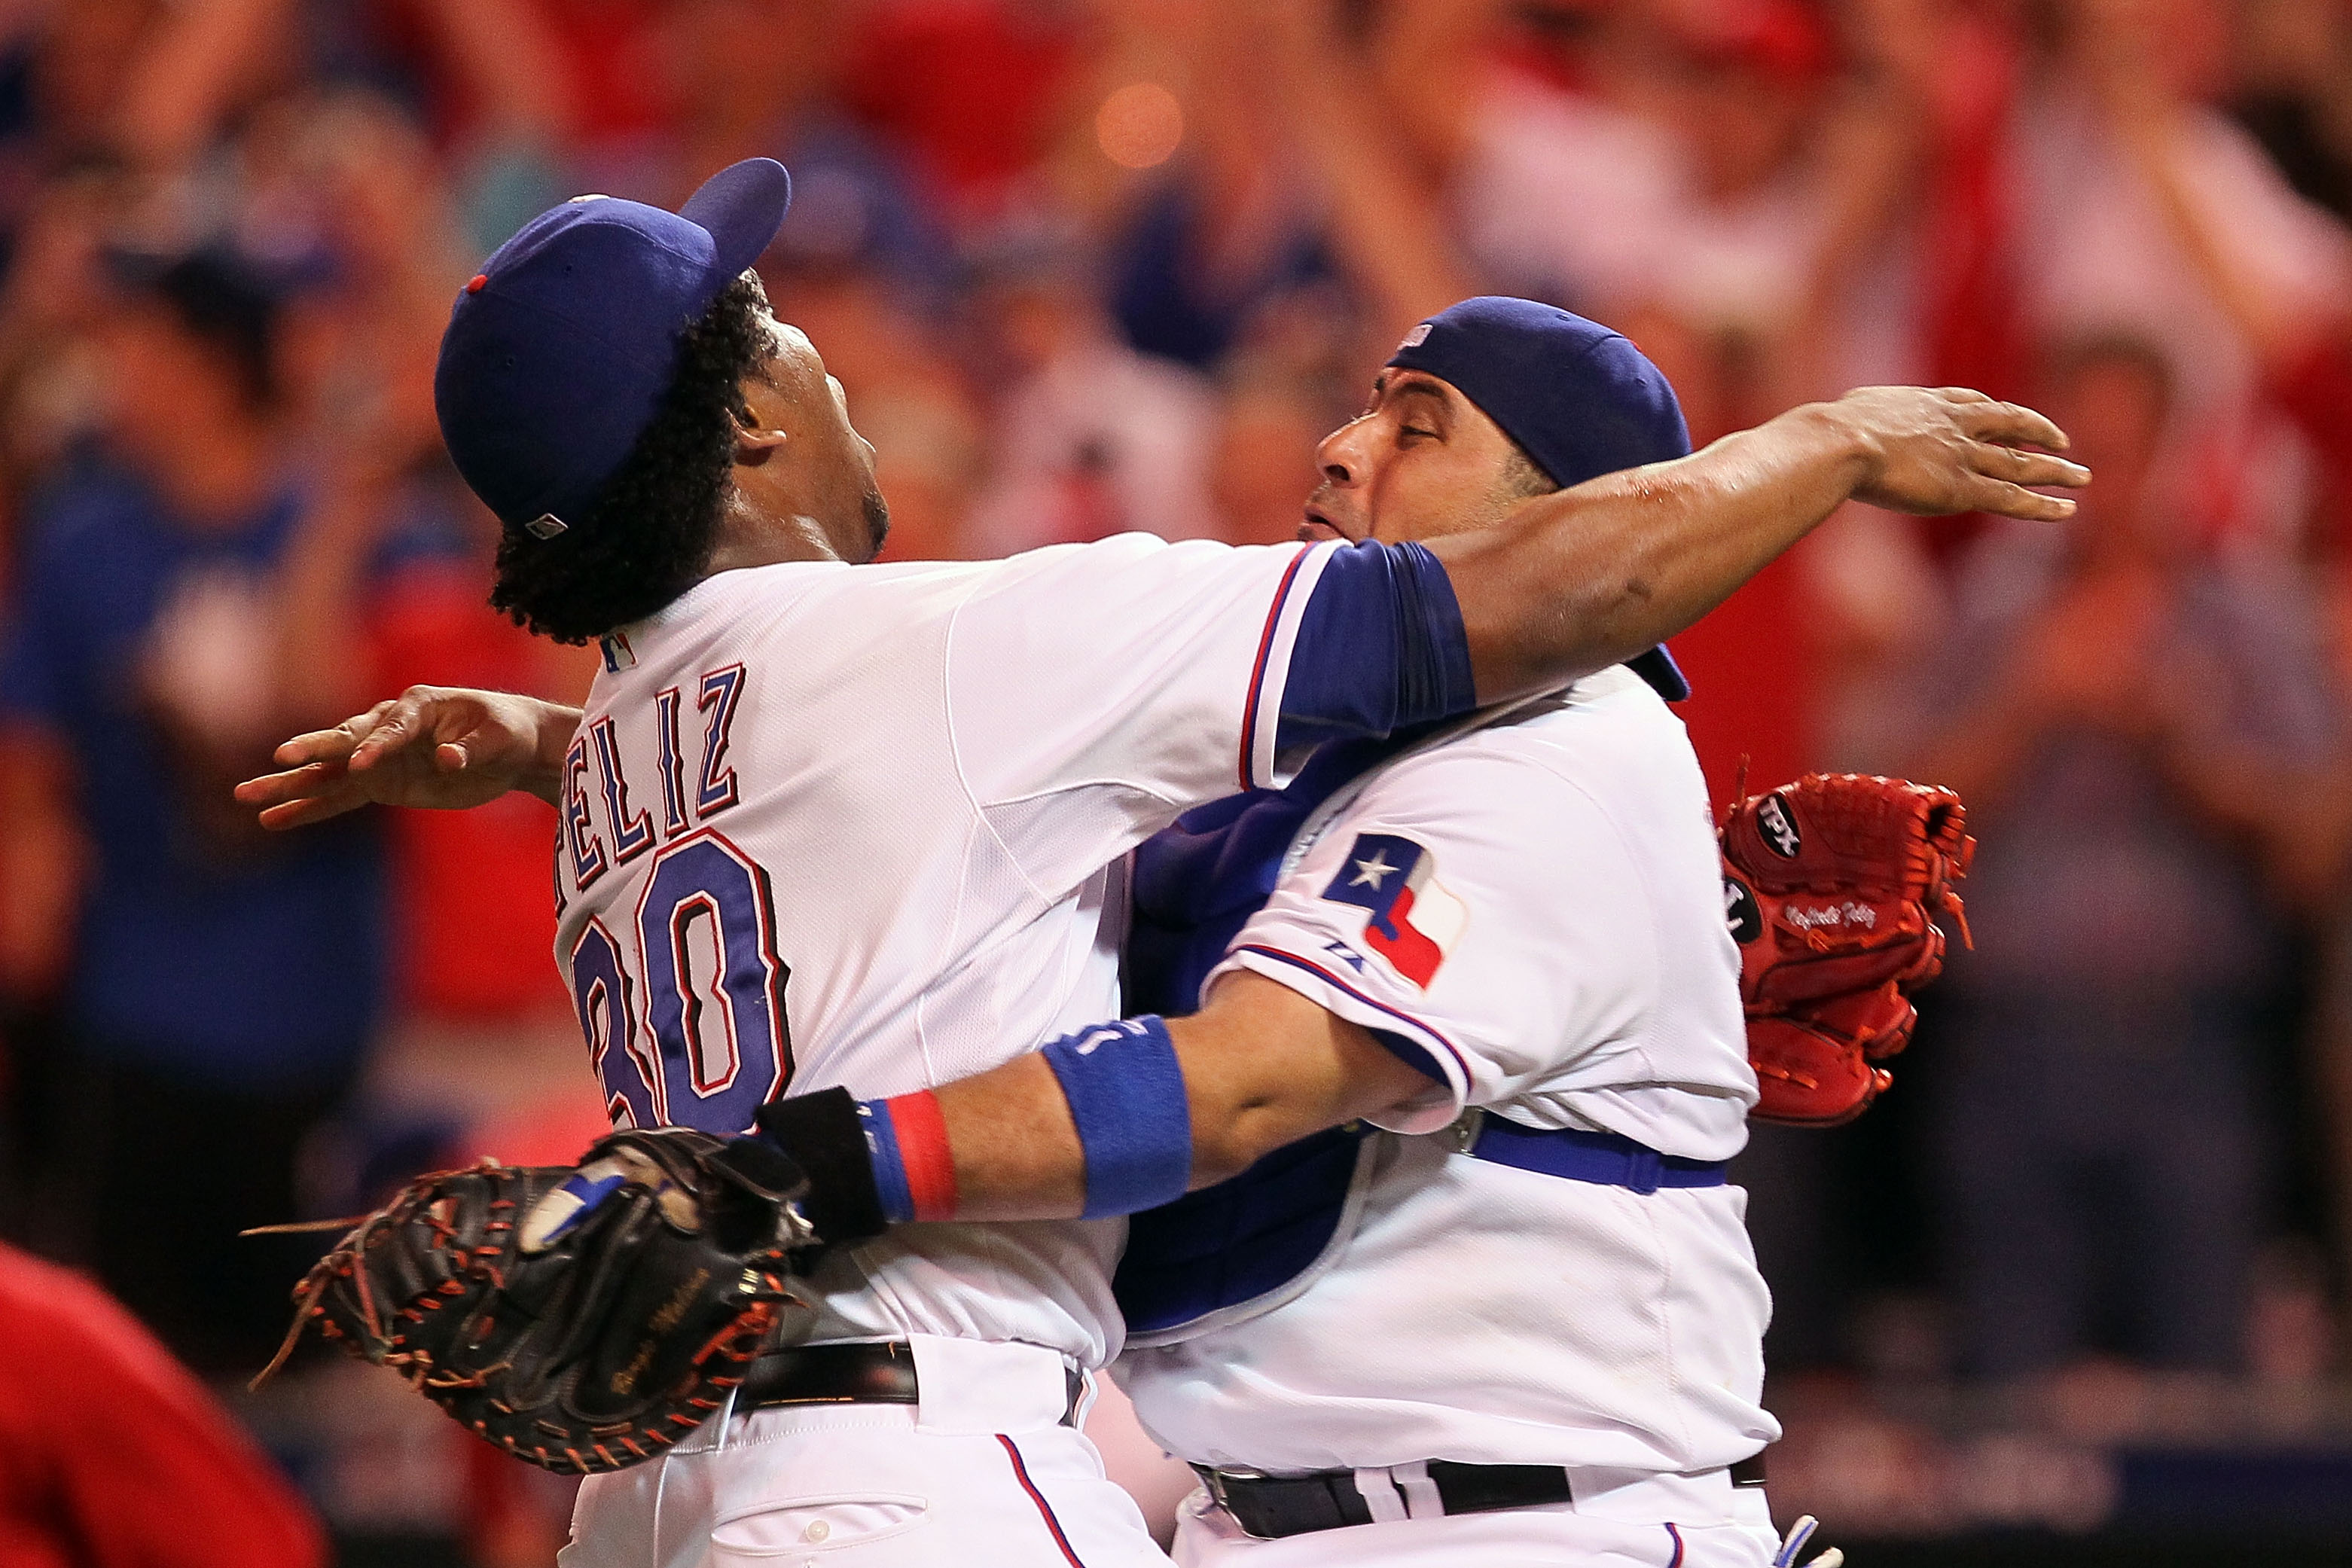 ARLINGTON, TX - OCTOBER 22:  Bengie Molina #11 and Neftali Feliz #30 of the Texas Rangers celebrate after defeating the New York Yankees 6-1 in Game Six of the ALCS to advance to the World Series during the 2010 MLB Playoffs at Rangers Ballpark in Arlingt